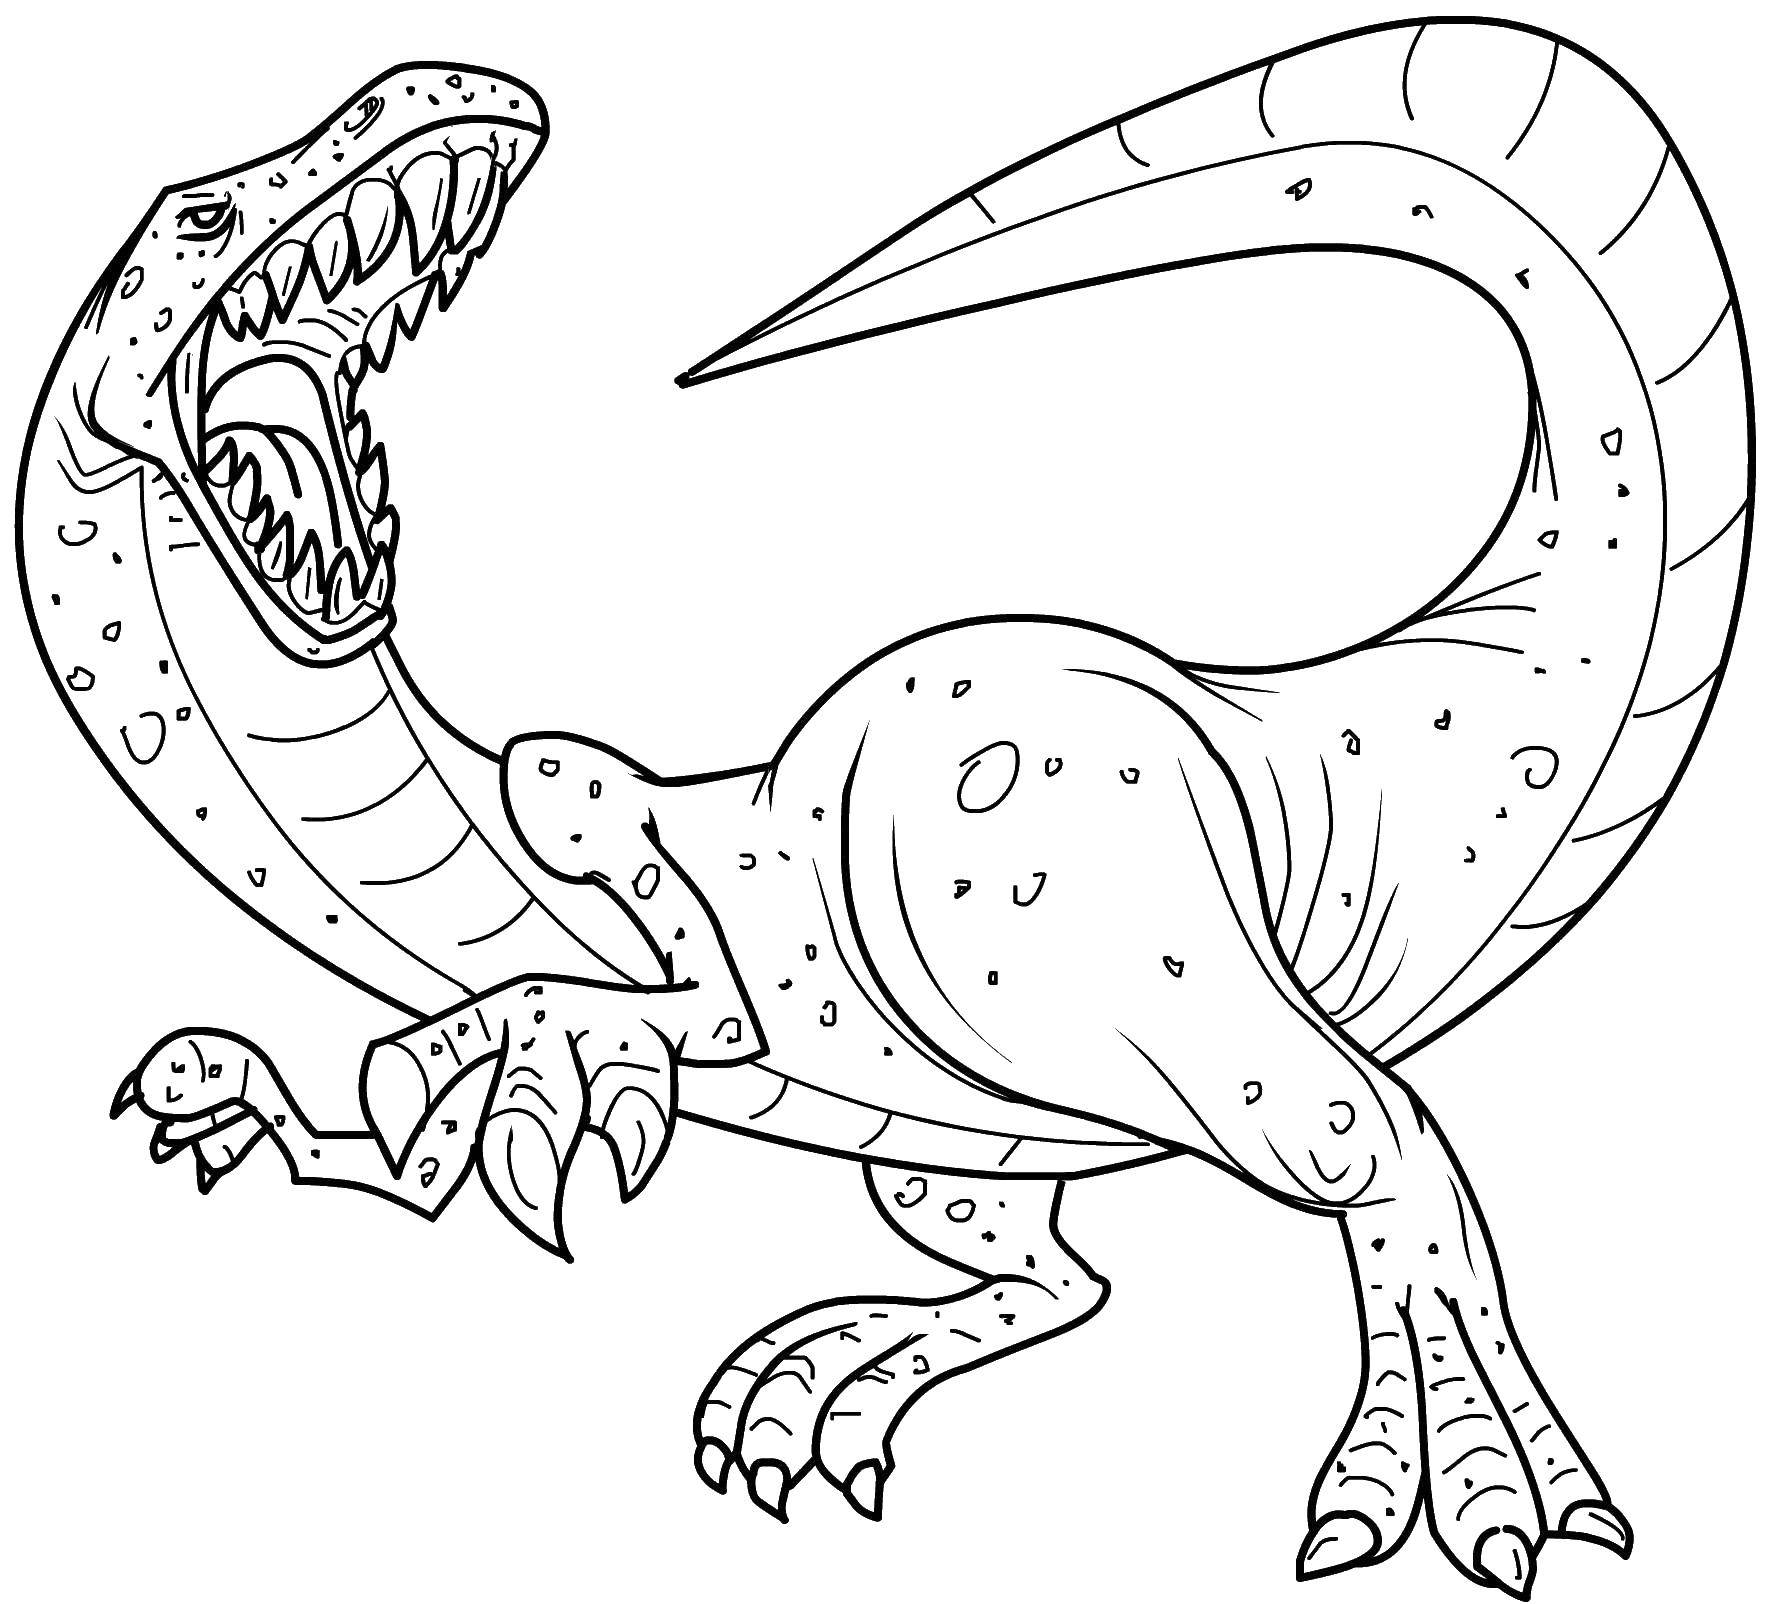 Coloring Dinosaur with open mouth. Category dinosaur. Tags:  dinosaurs, dinosaur.